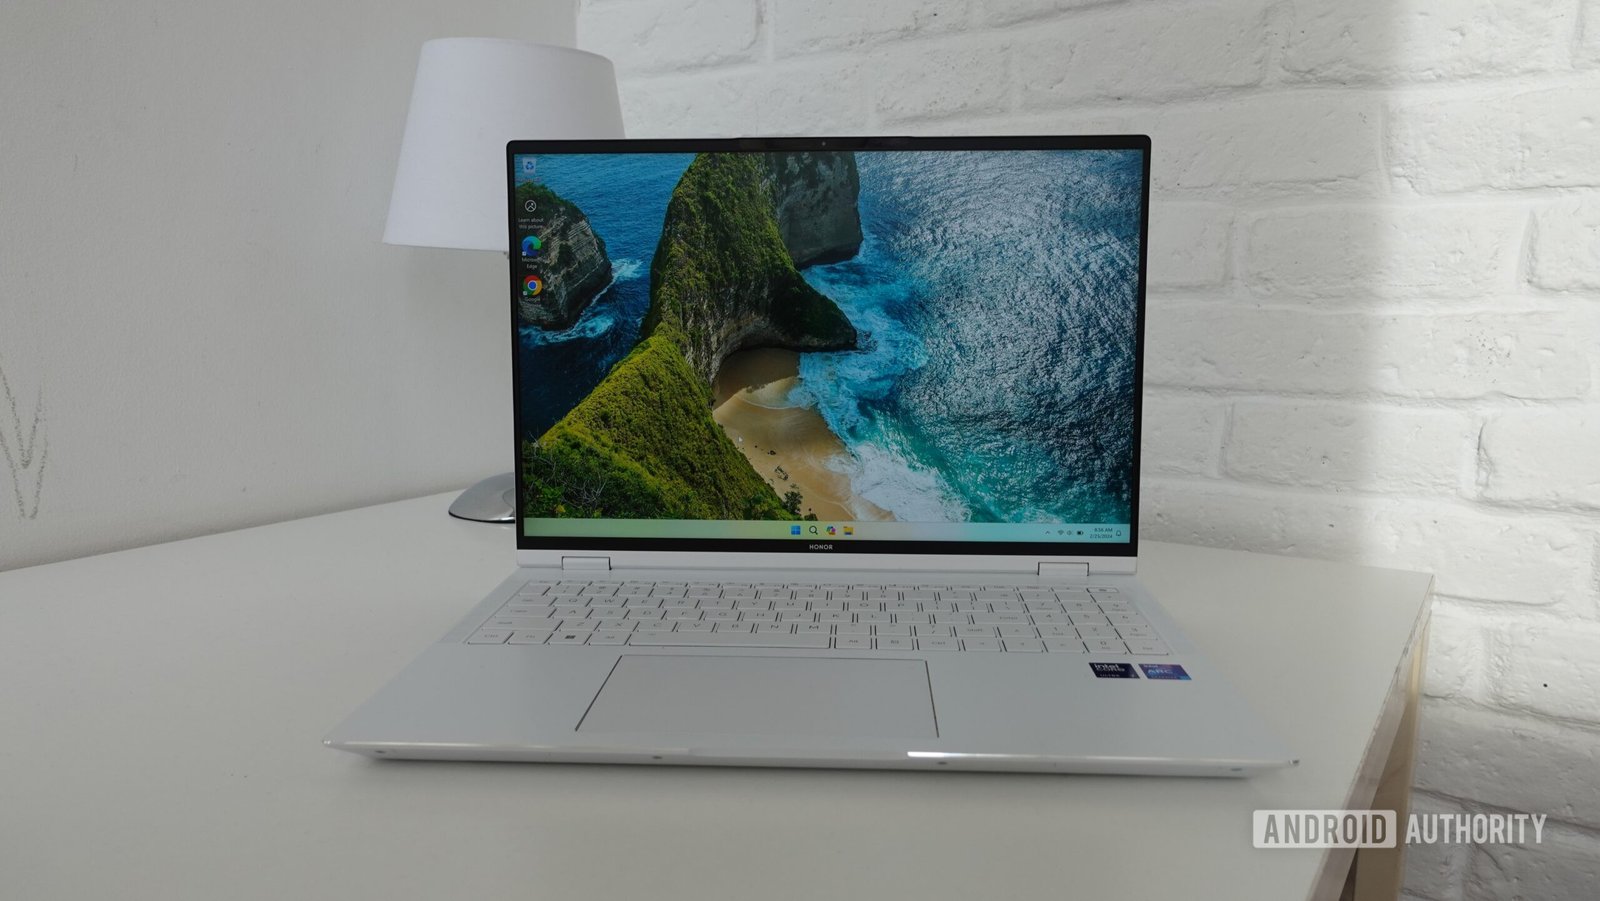 HONOR MagicBook 16 Pro is a powerful laptop designed for the age of AI